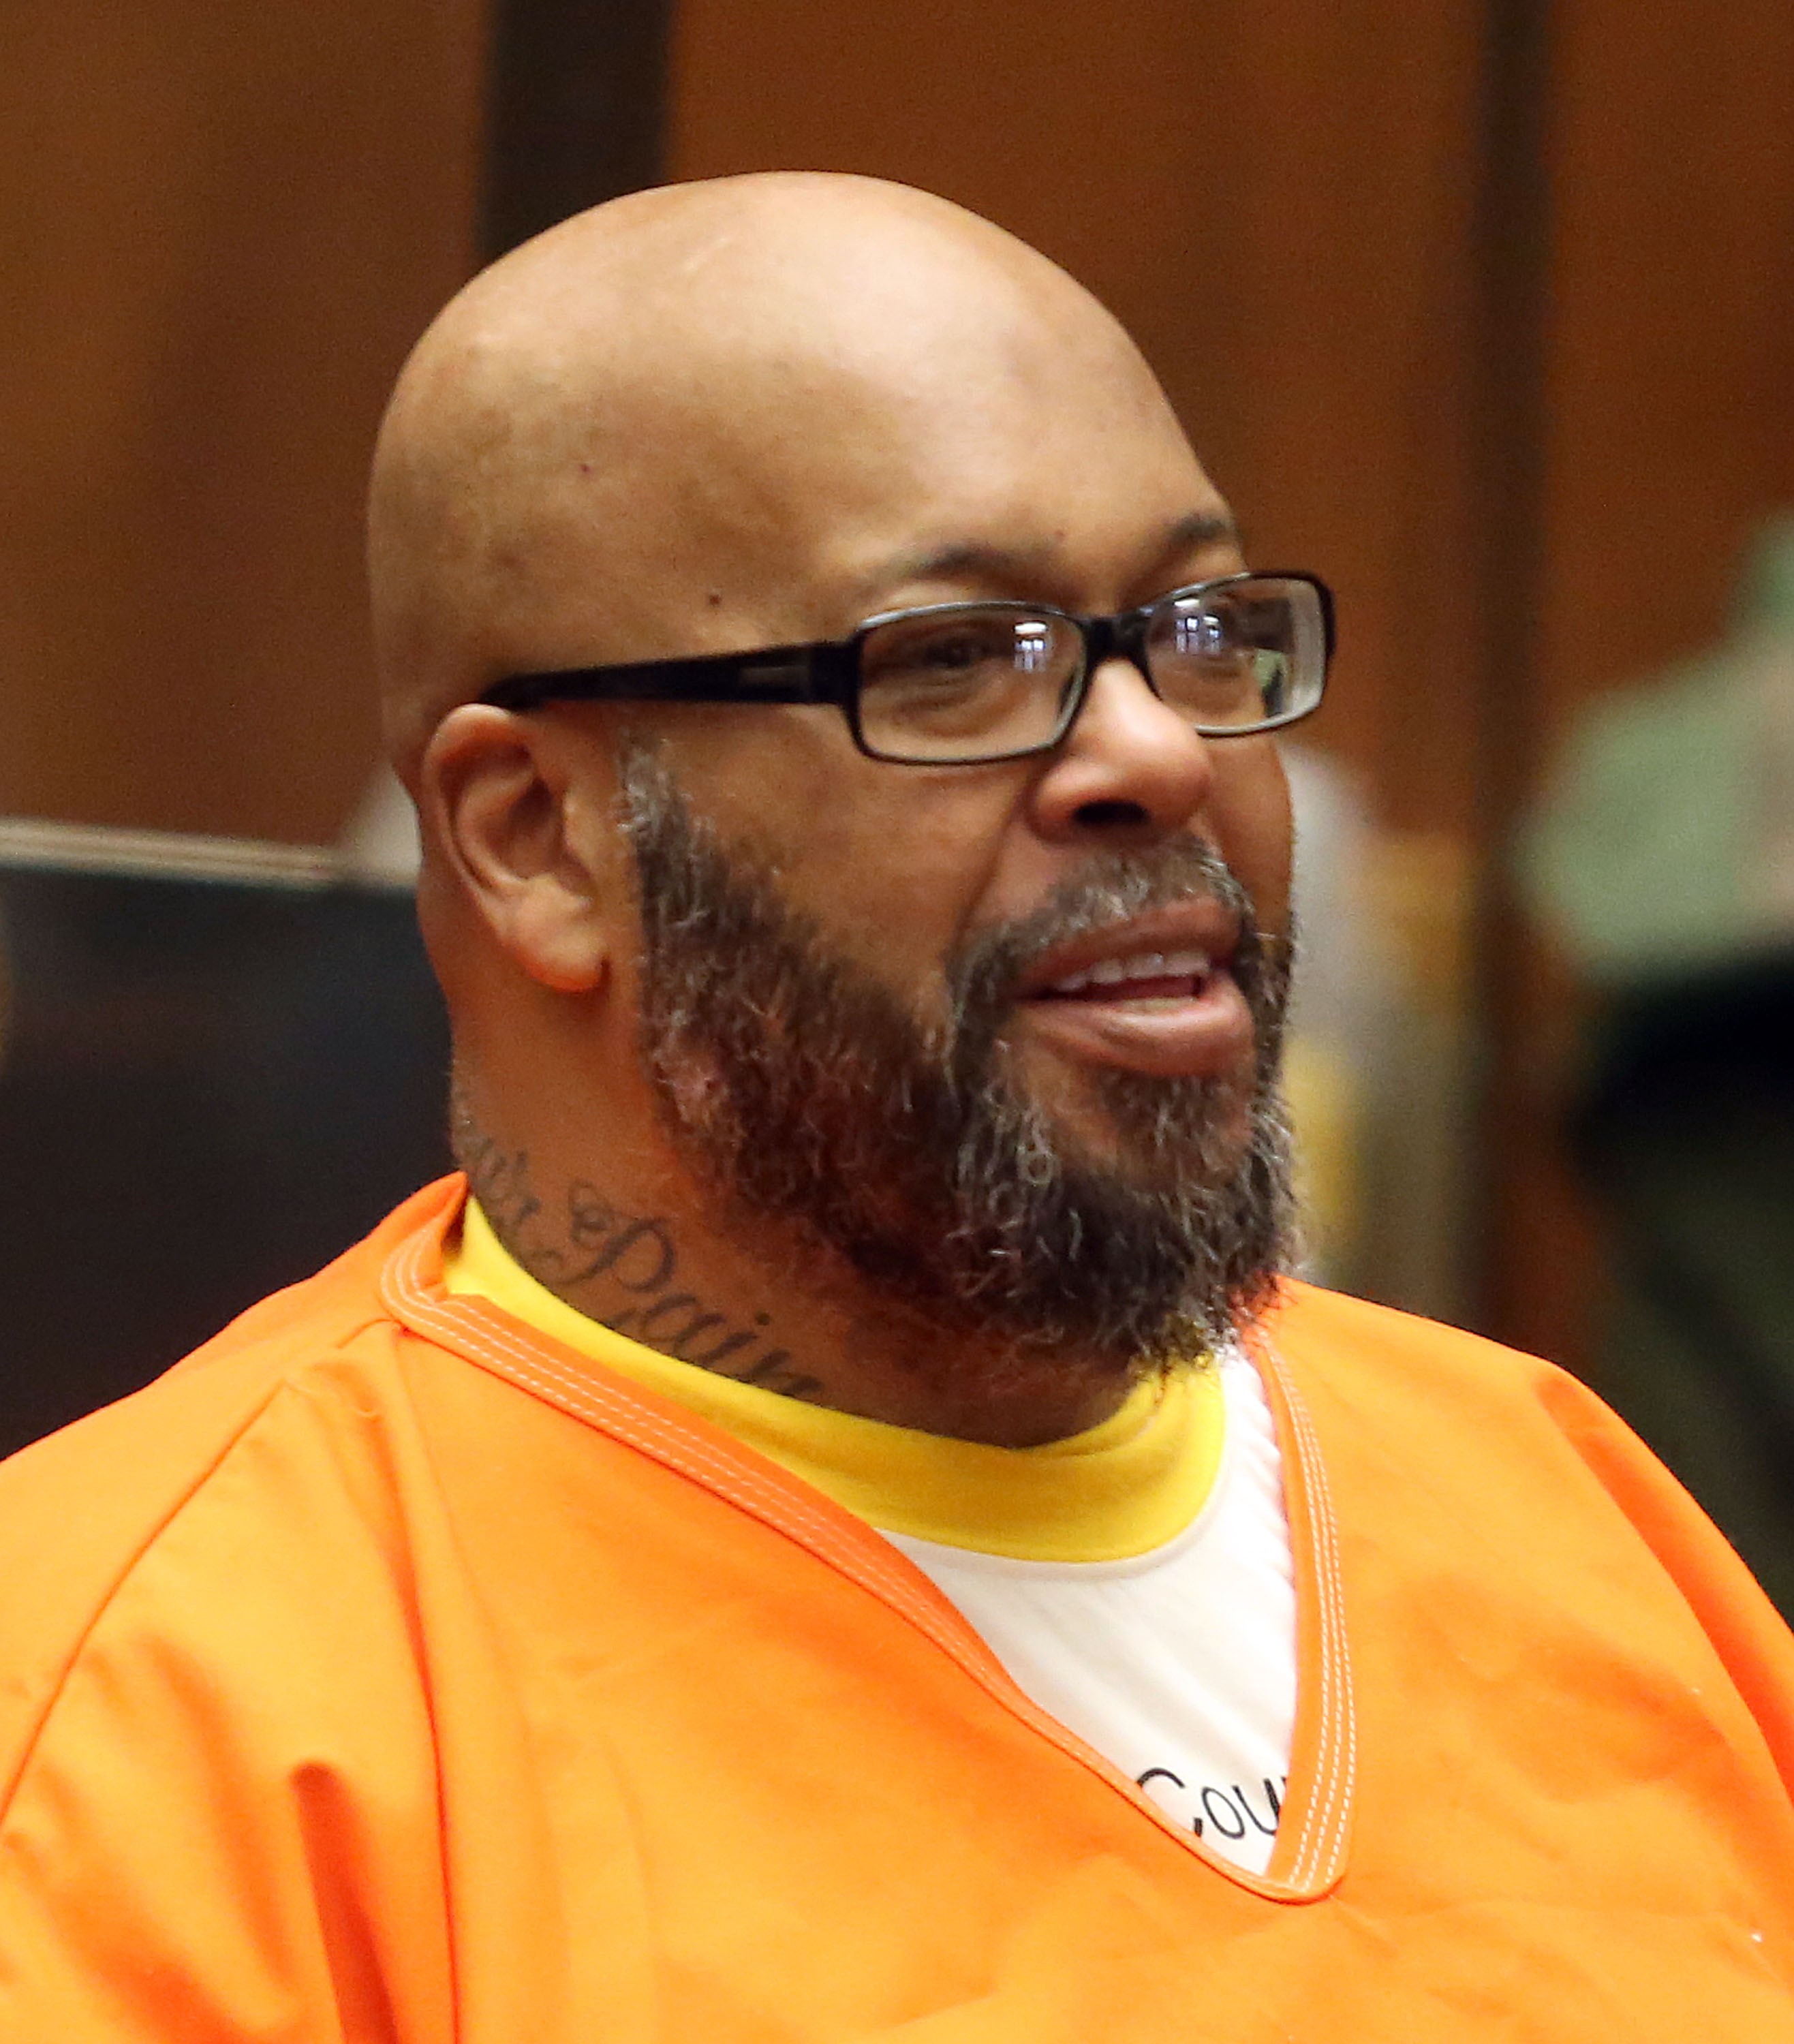 Suge Knight Takes Plea Deal, Gets 28 Year Sentence The Latest HipHop News, Music and Media